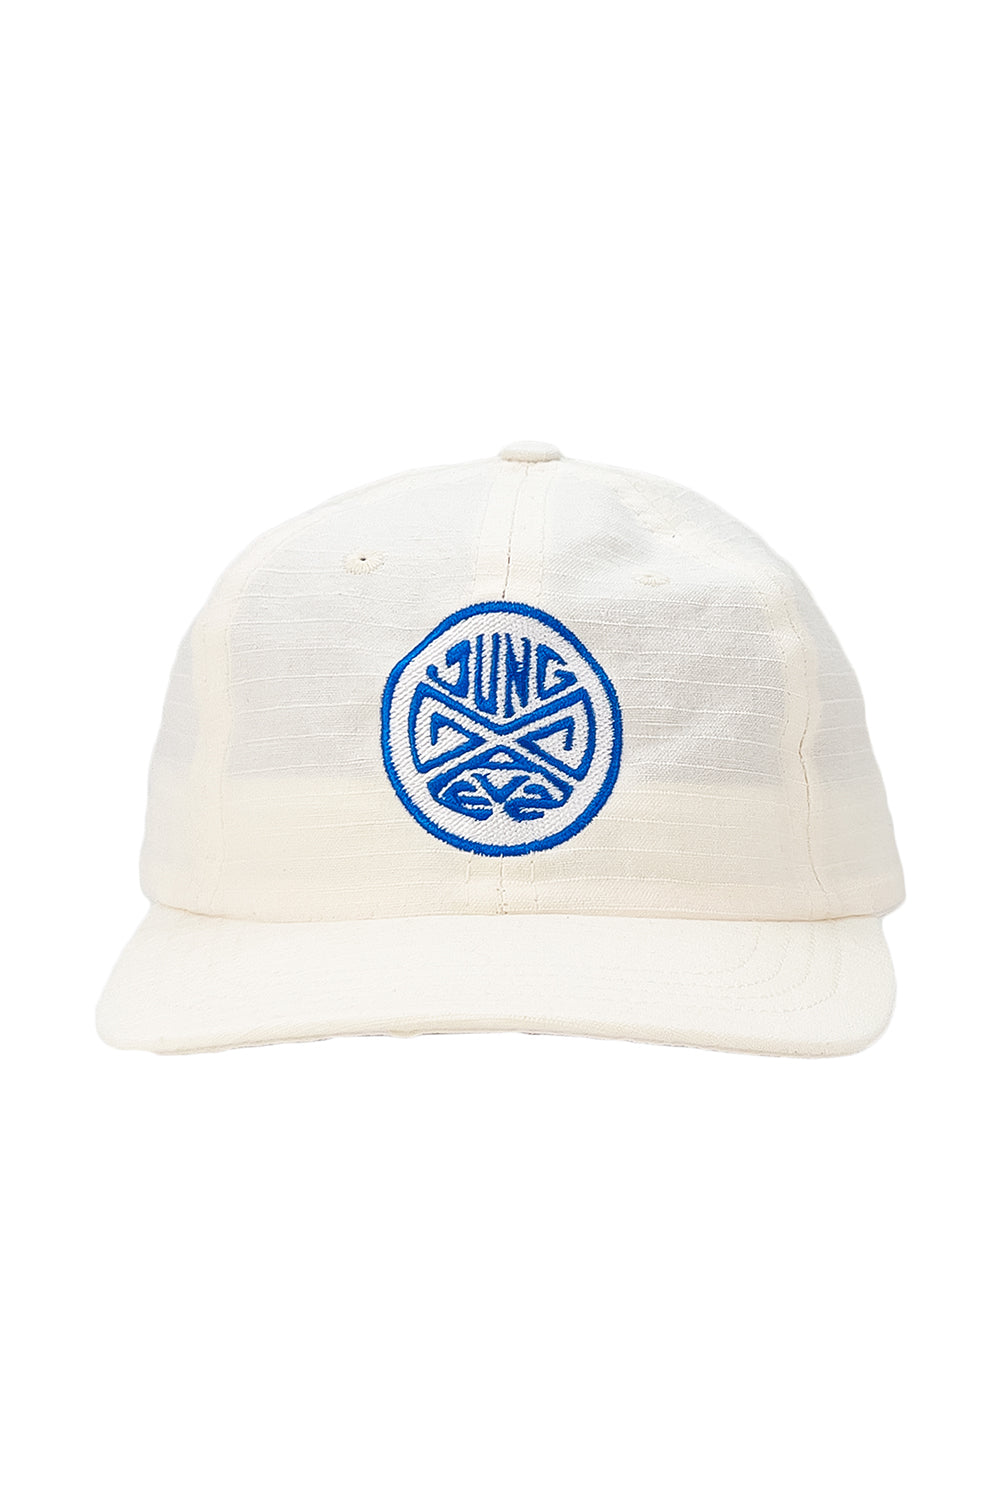 Third Eye Ripstop Cap | Jungmaven Hemp Clothing & Accessories / Color: Washed White